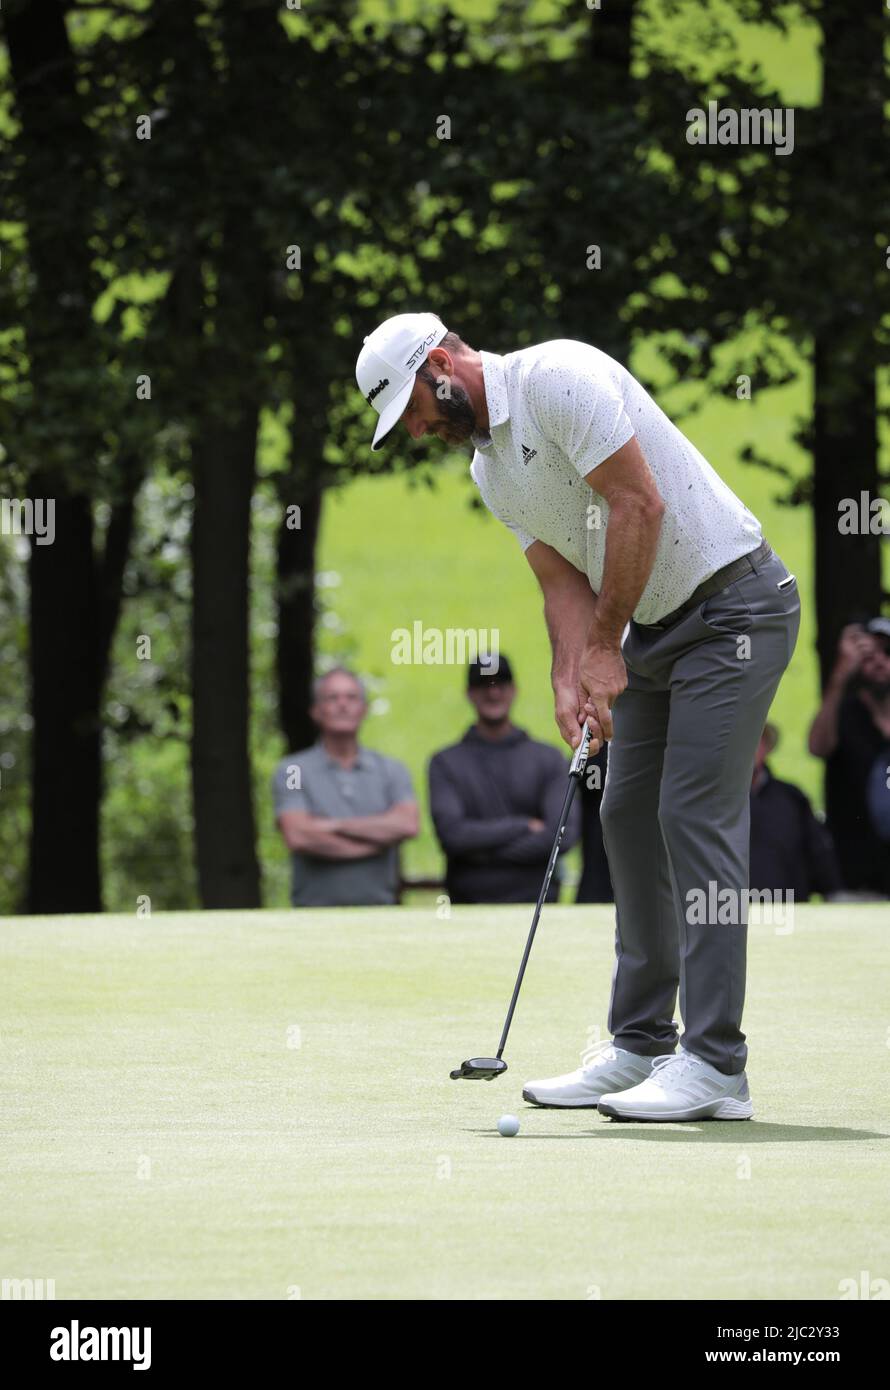 London, UK. 09th June, 2022. American Dustin Johnson putts on the 1st green during the first round of the inaugural LIV Golf event at the Centurion club in Hertfordshire on Thurssday, June 09, 2022.The event is 12 teams of four players competing over 54 holes for a prize pot of $25million dollars to the winning team. Photo by Hugo Philpott/UPI Credit: UPI/Alamy Live News Stock Photo